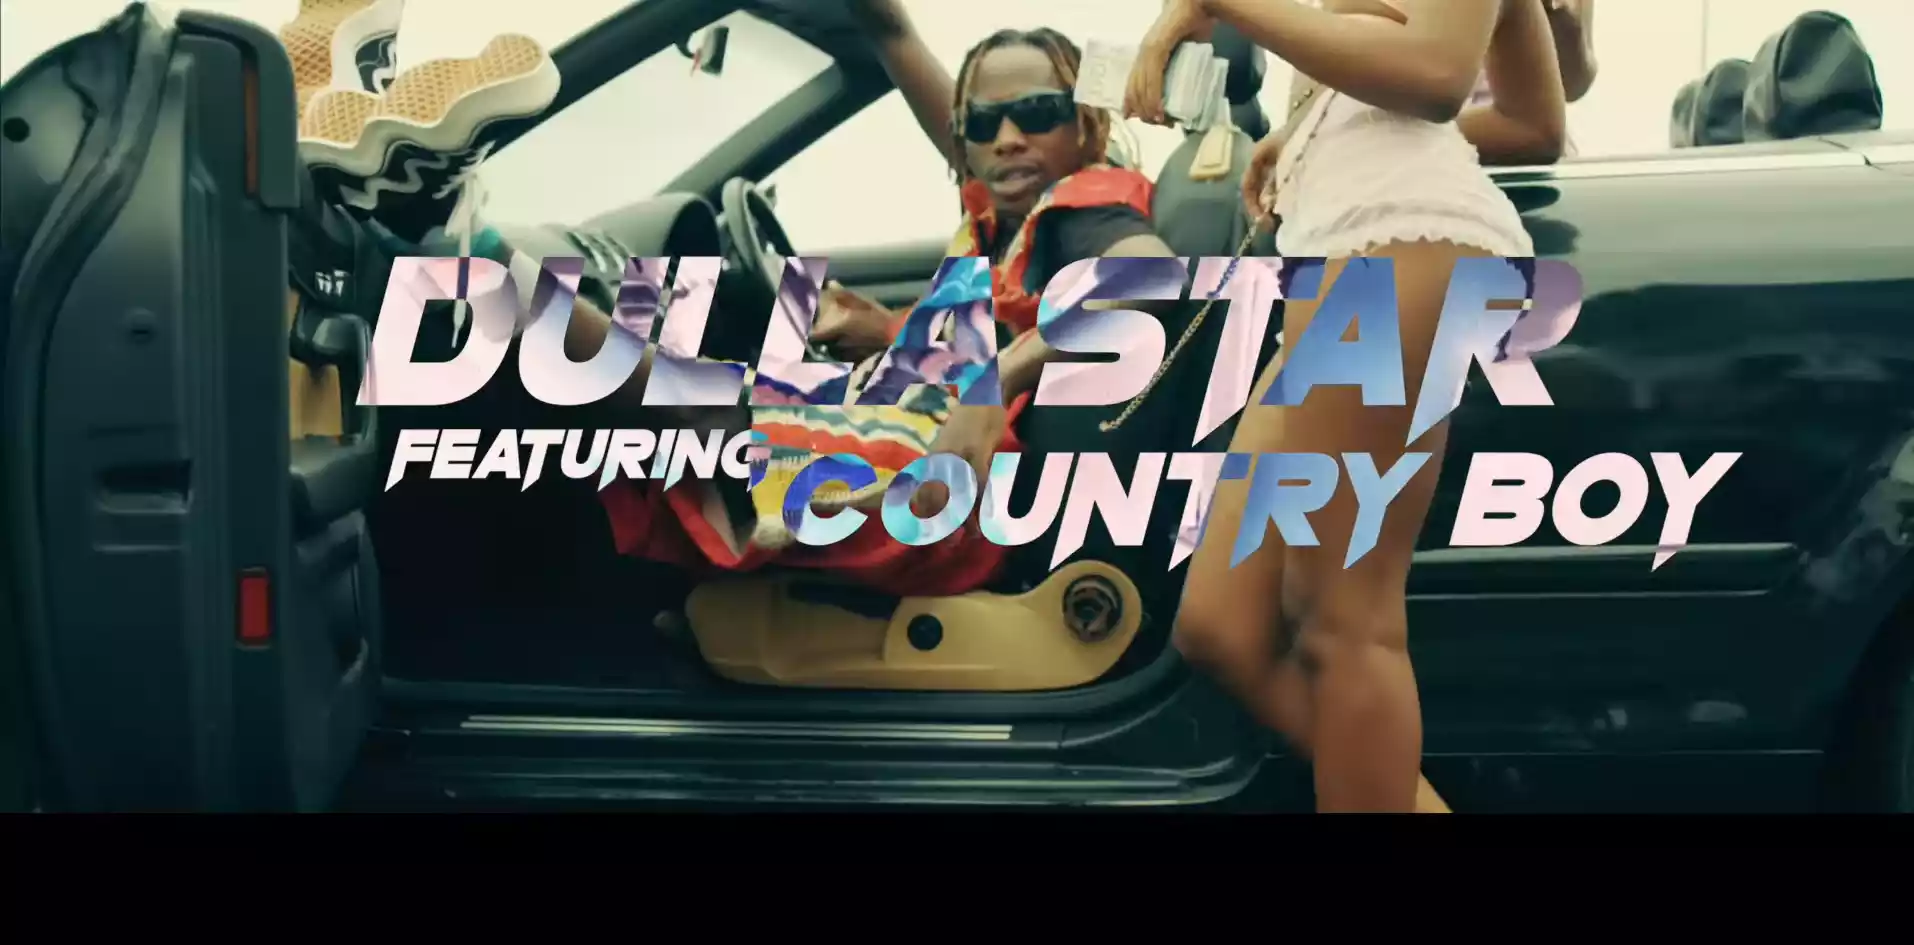 Dullastar ft Country Wizzy Billion Video Download